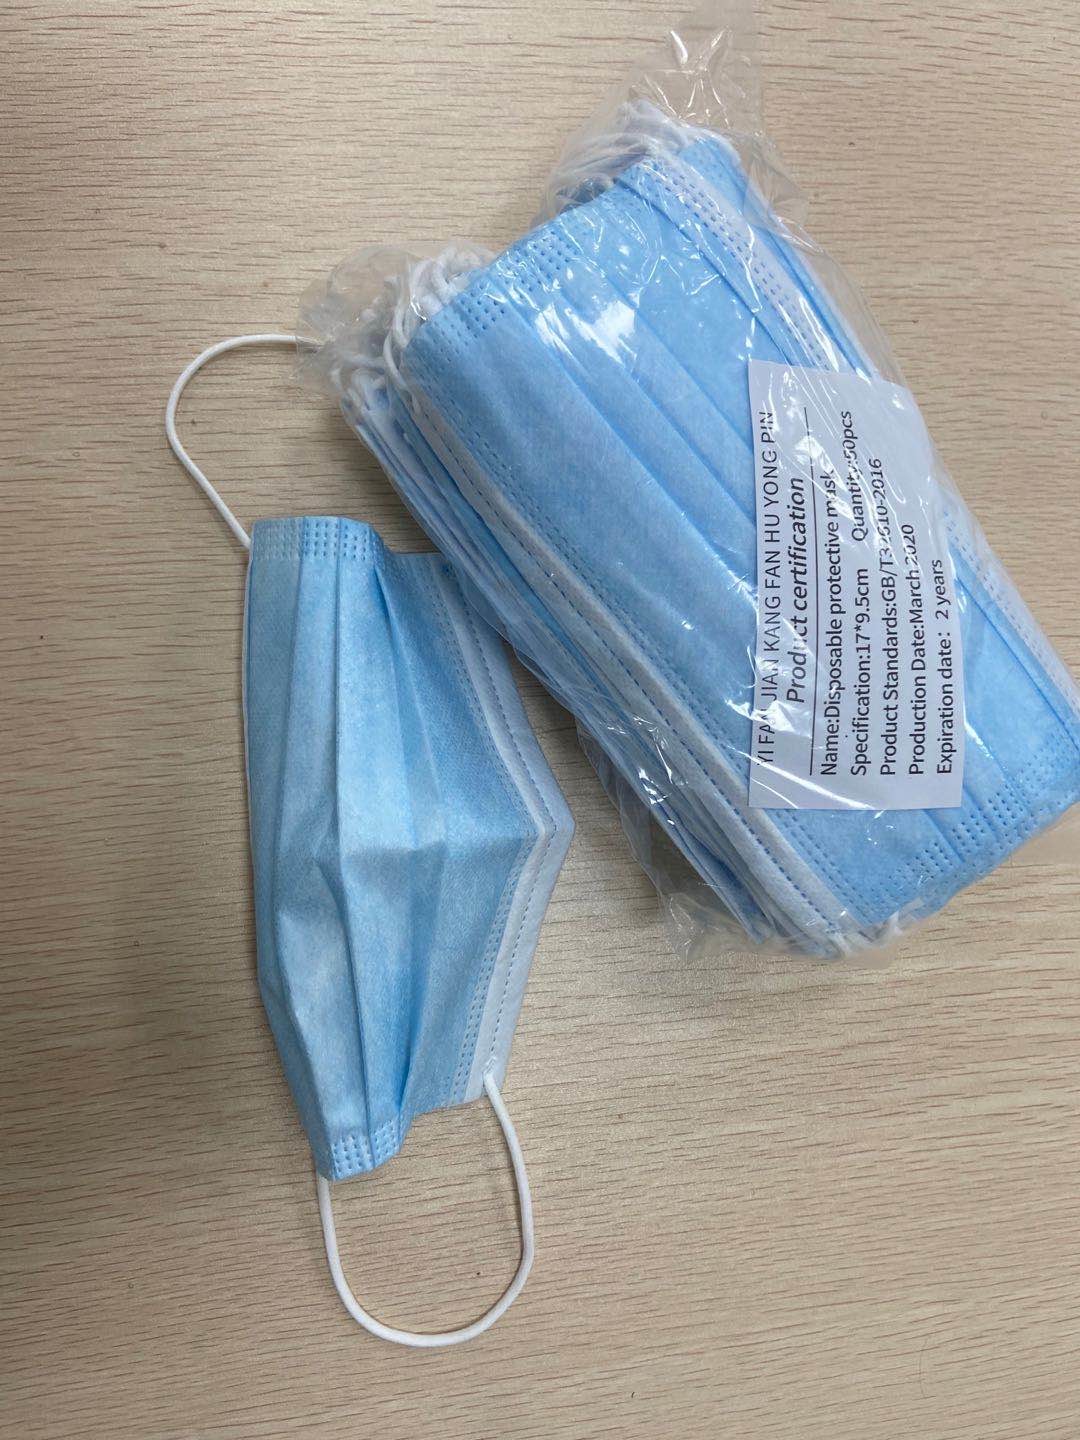  17.5*9.5cm Non Woven Fabric Face Mask General Medical Supplies Manufactures